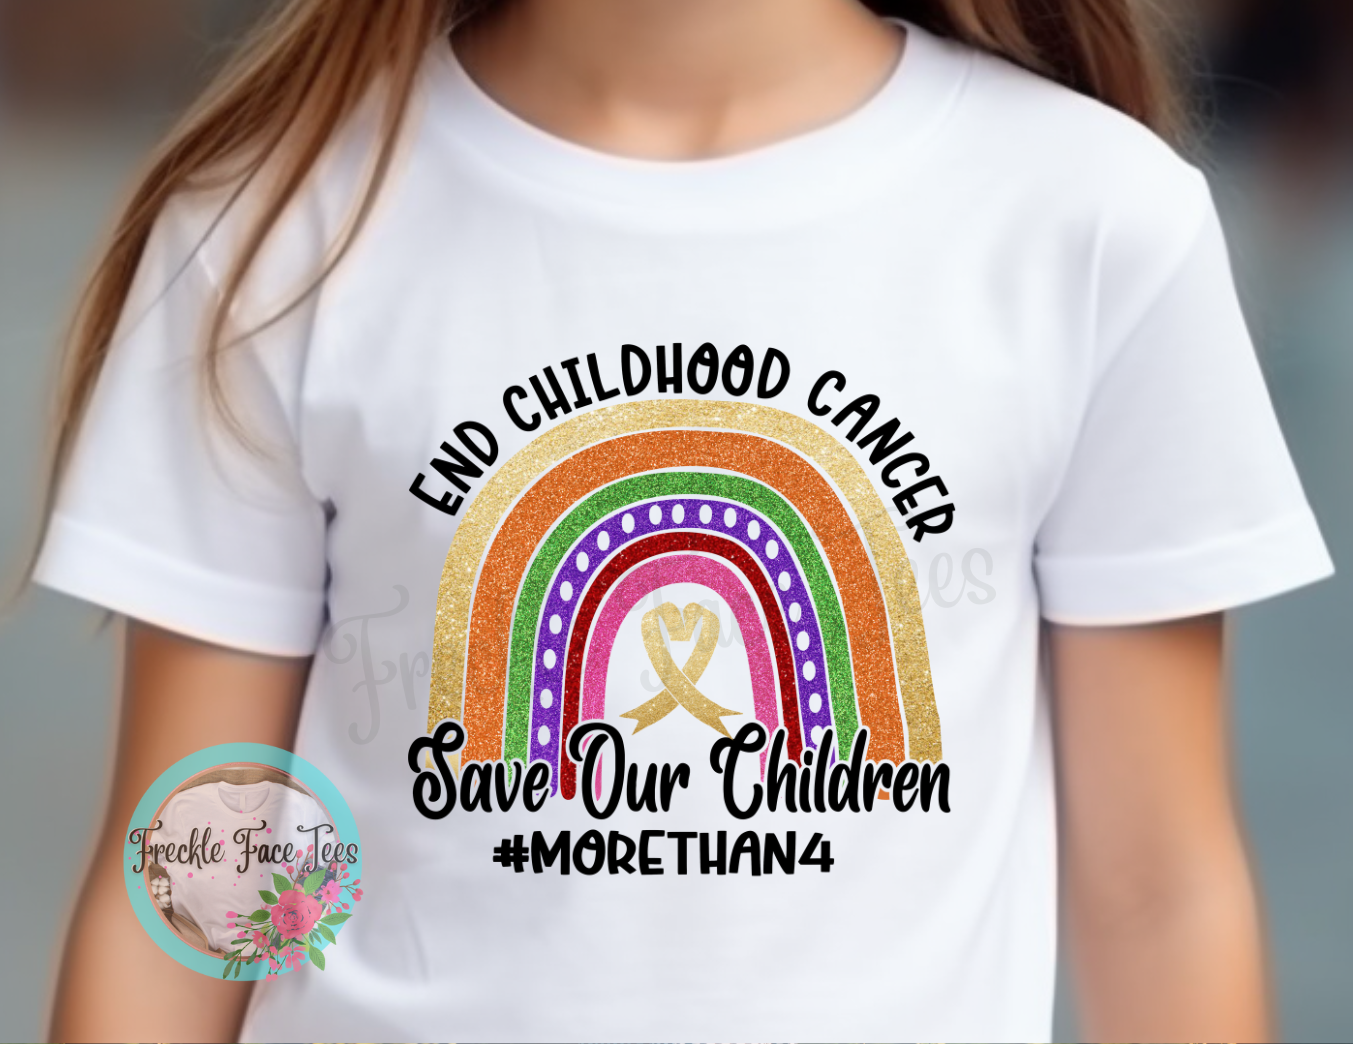 Childhood Cancer Awareness Save Our Children - FUNDRAISER